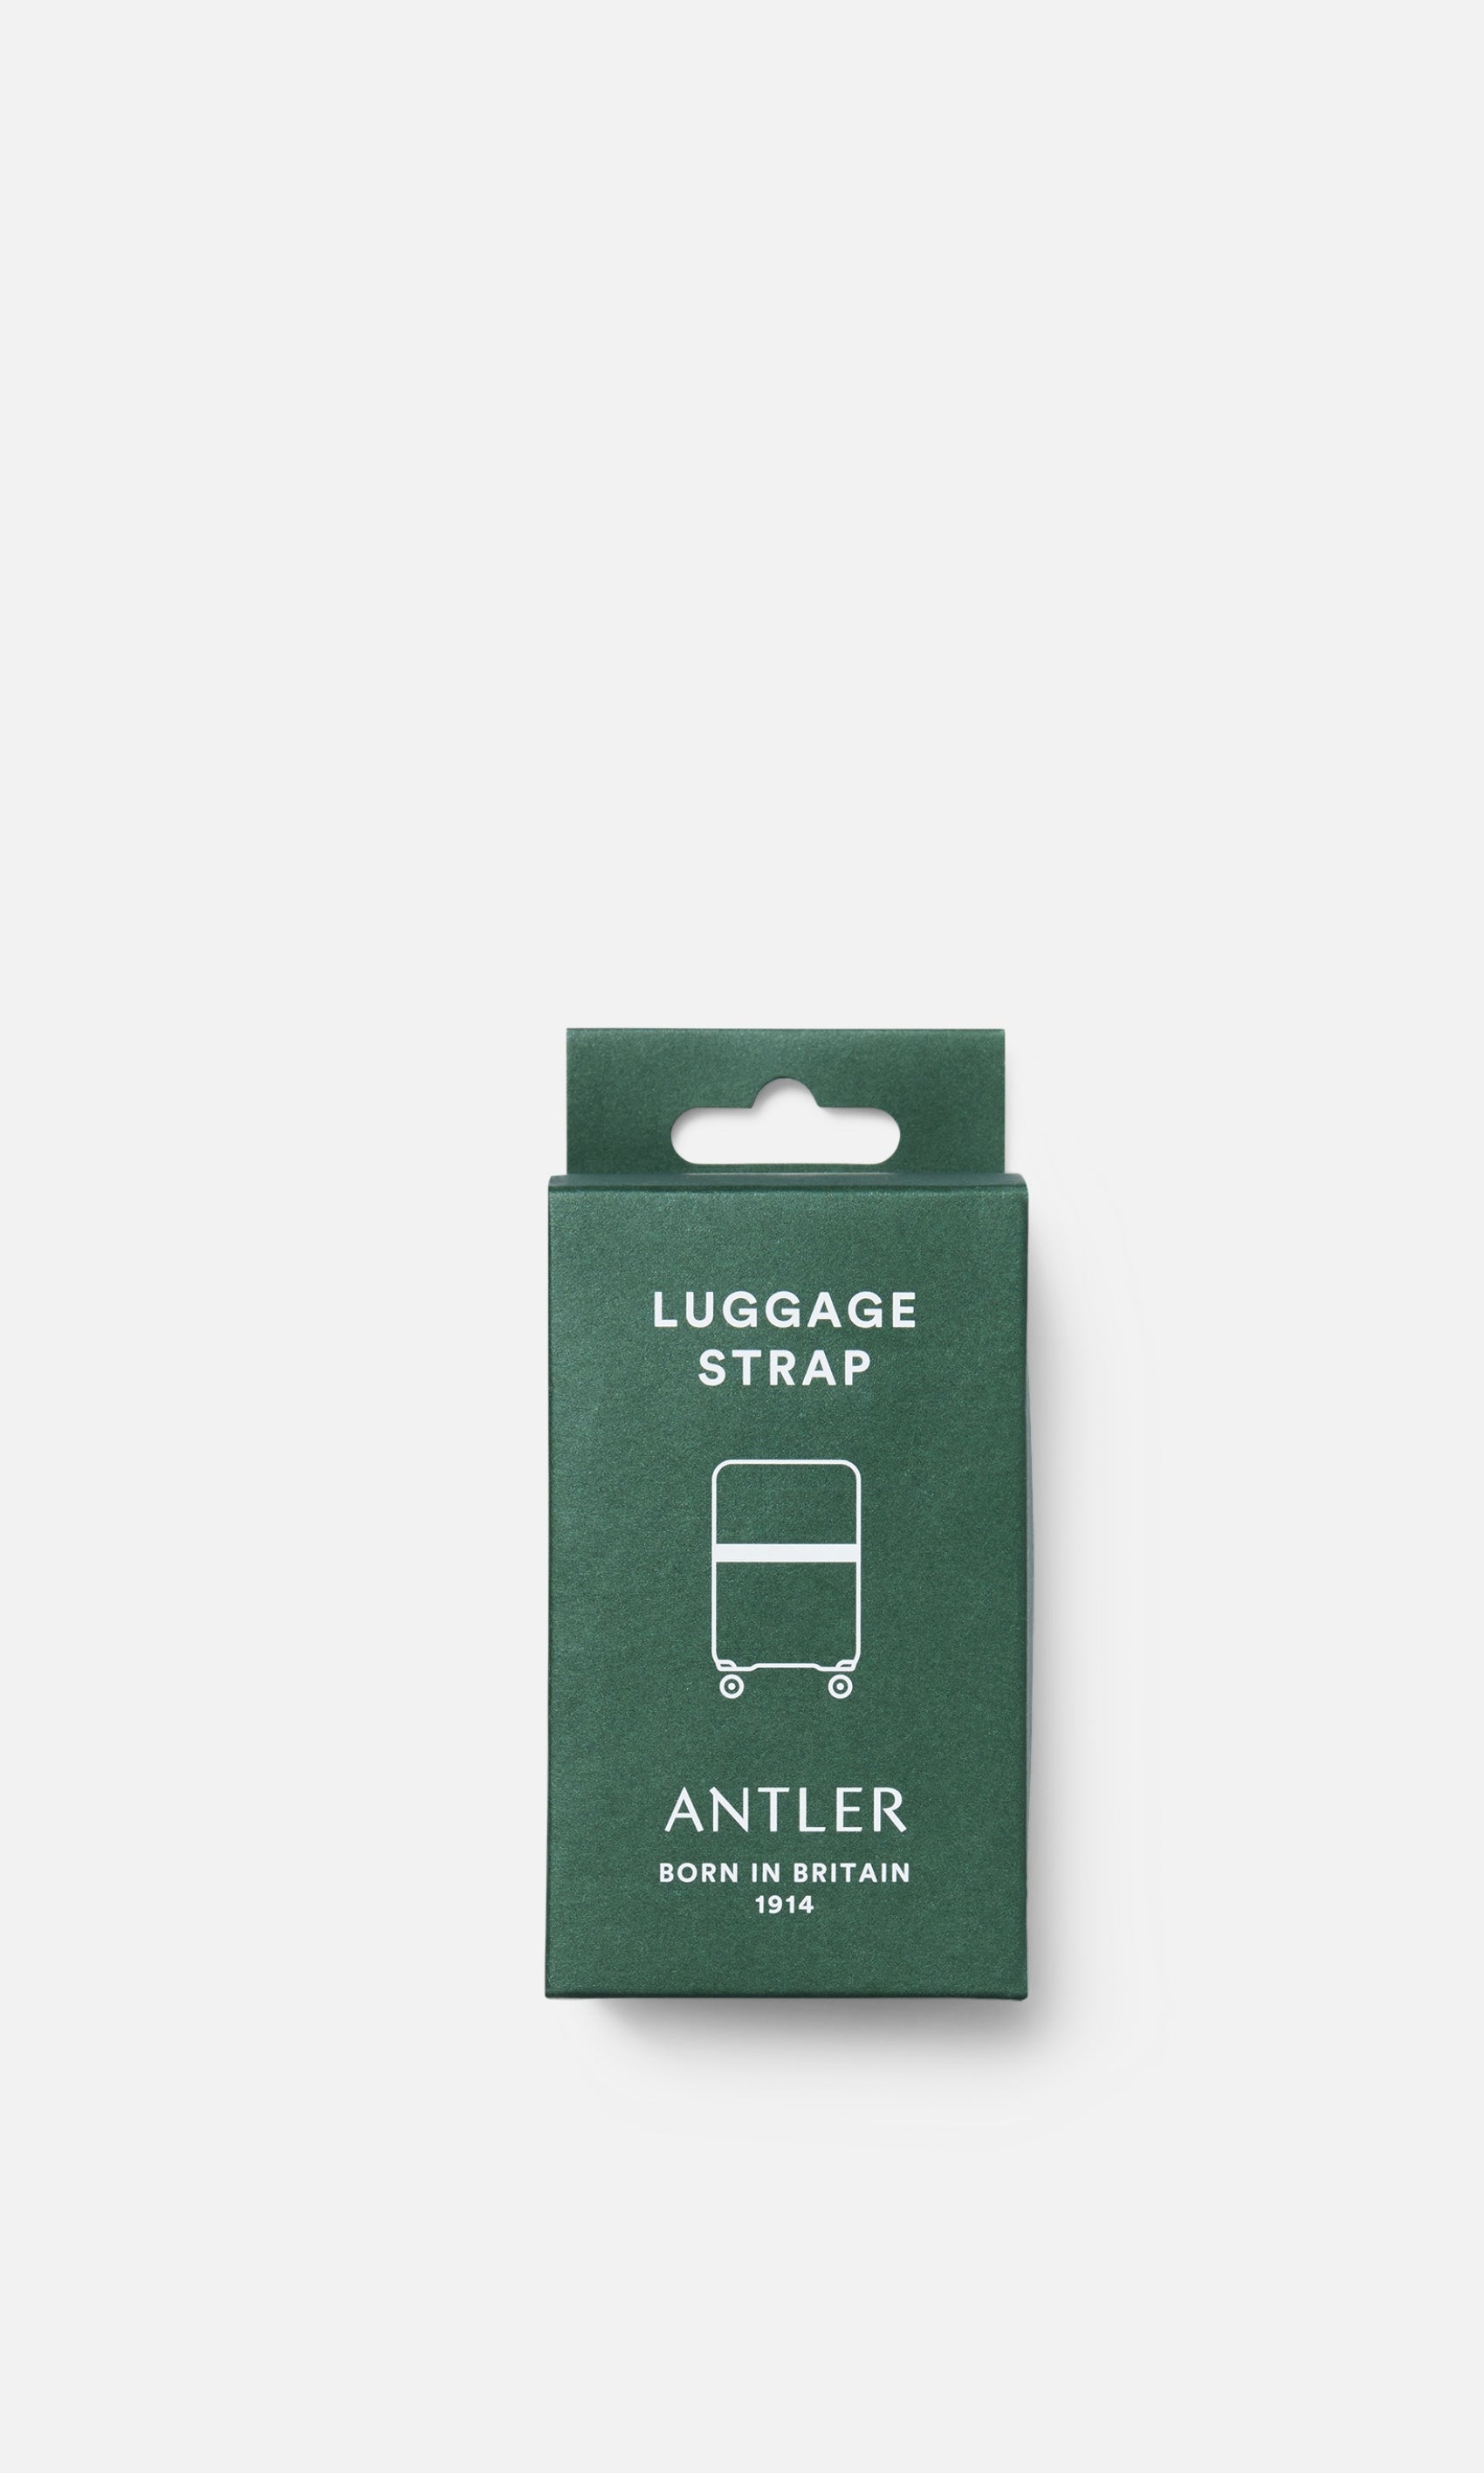 Antler Luggage -  Luggage strap in green - Luggage Straps Luggage Strap In Green | Adjustable Straps